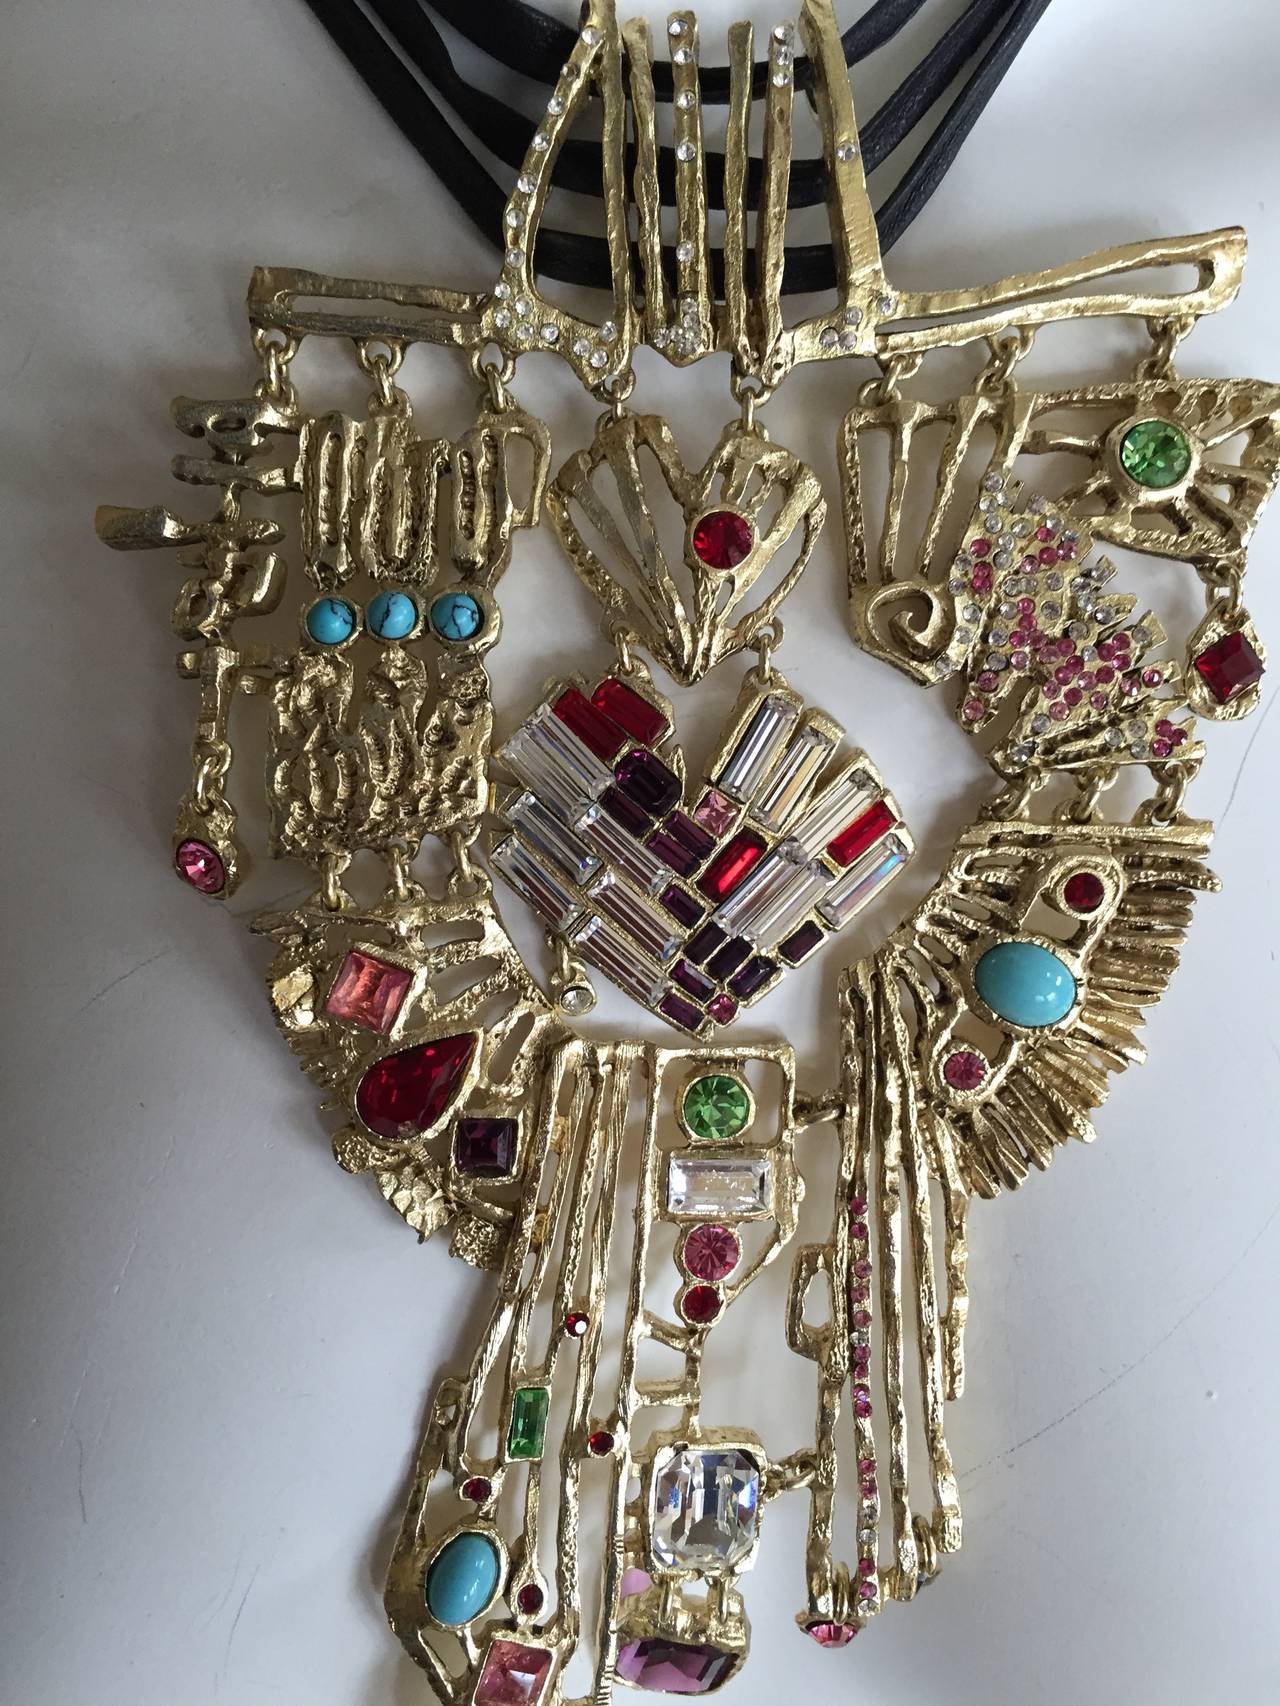 Wonderful vintage Necklace earrings and bracelet from Christian Lacroix.
New in Christian Lacroix box.
The crystals are from Swarovski, and the cabachons are glass.
The decorative metal on the necklace measures 7